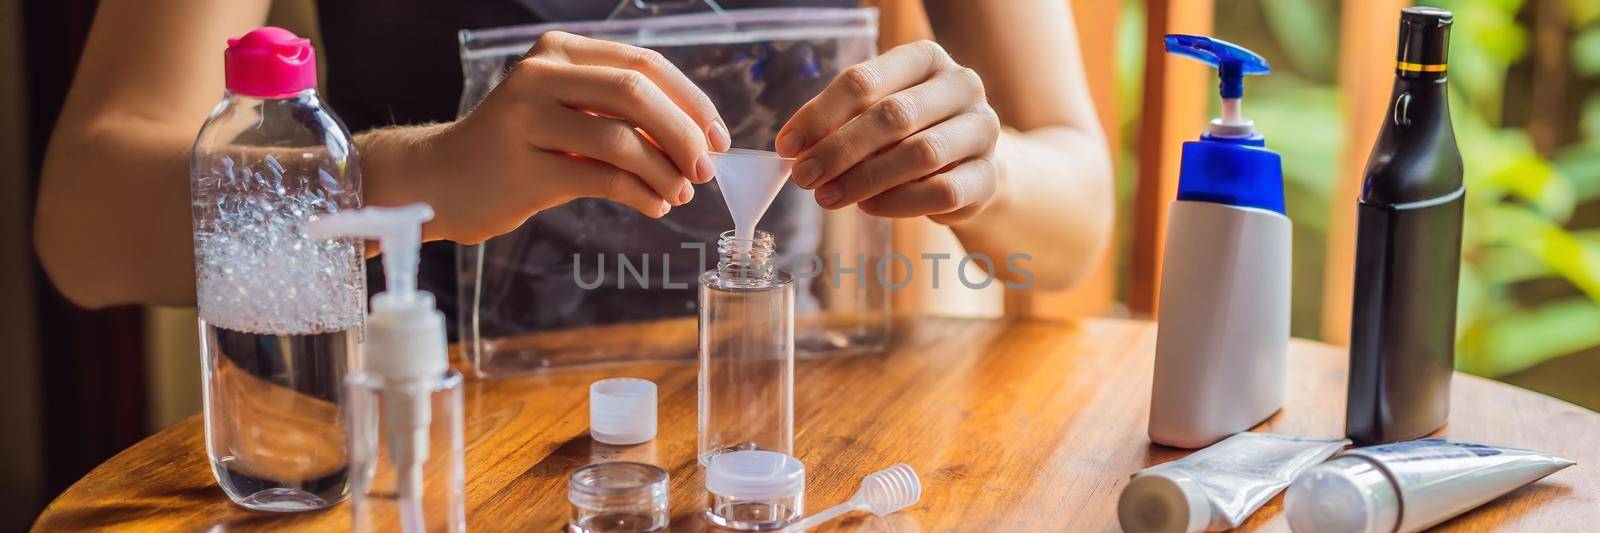 Travel kit for transporting cosmetics on an airplane. Cosmetics are ready to be poured into small bottles. A woman shifts cosmetics to take with her. BANNER, LONG FORMAT